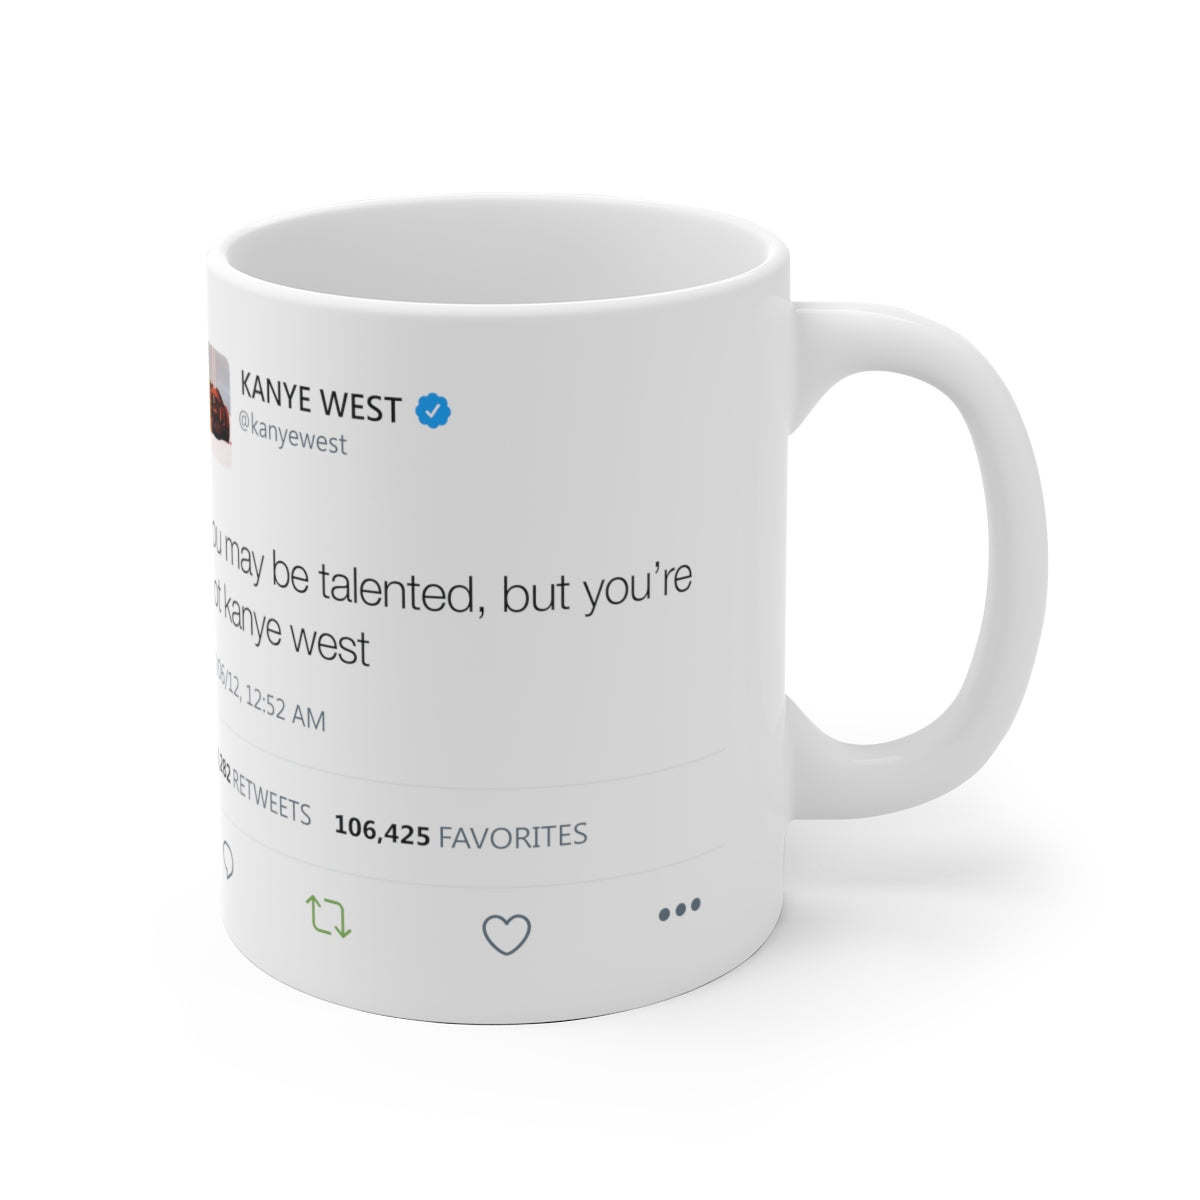 You may be talented, but you are not Kanye West Tweet Mug-Archethype